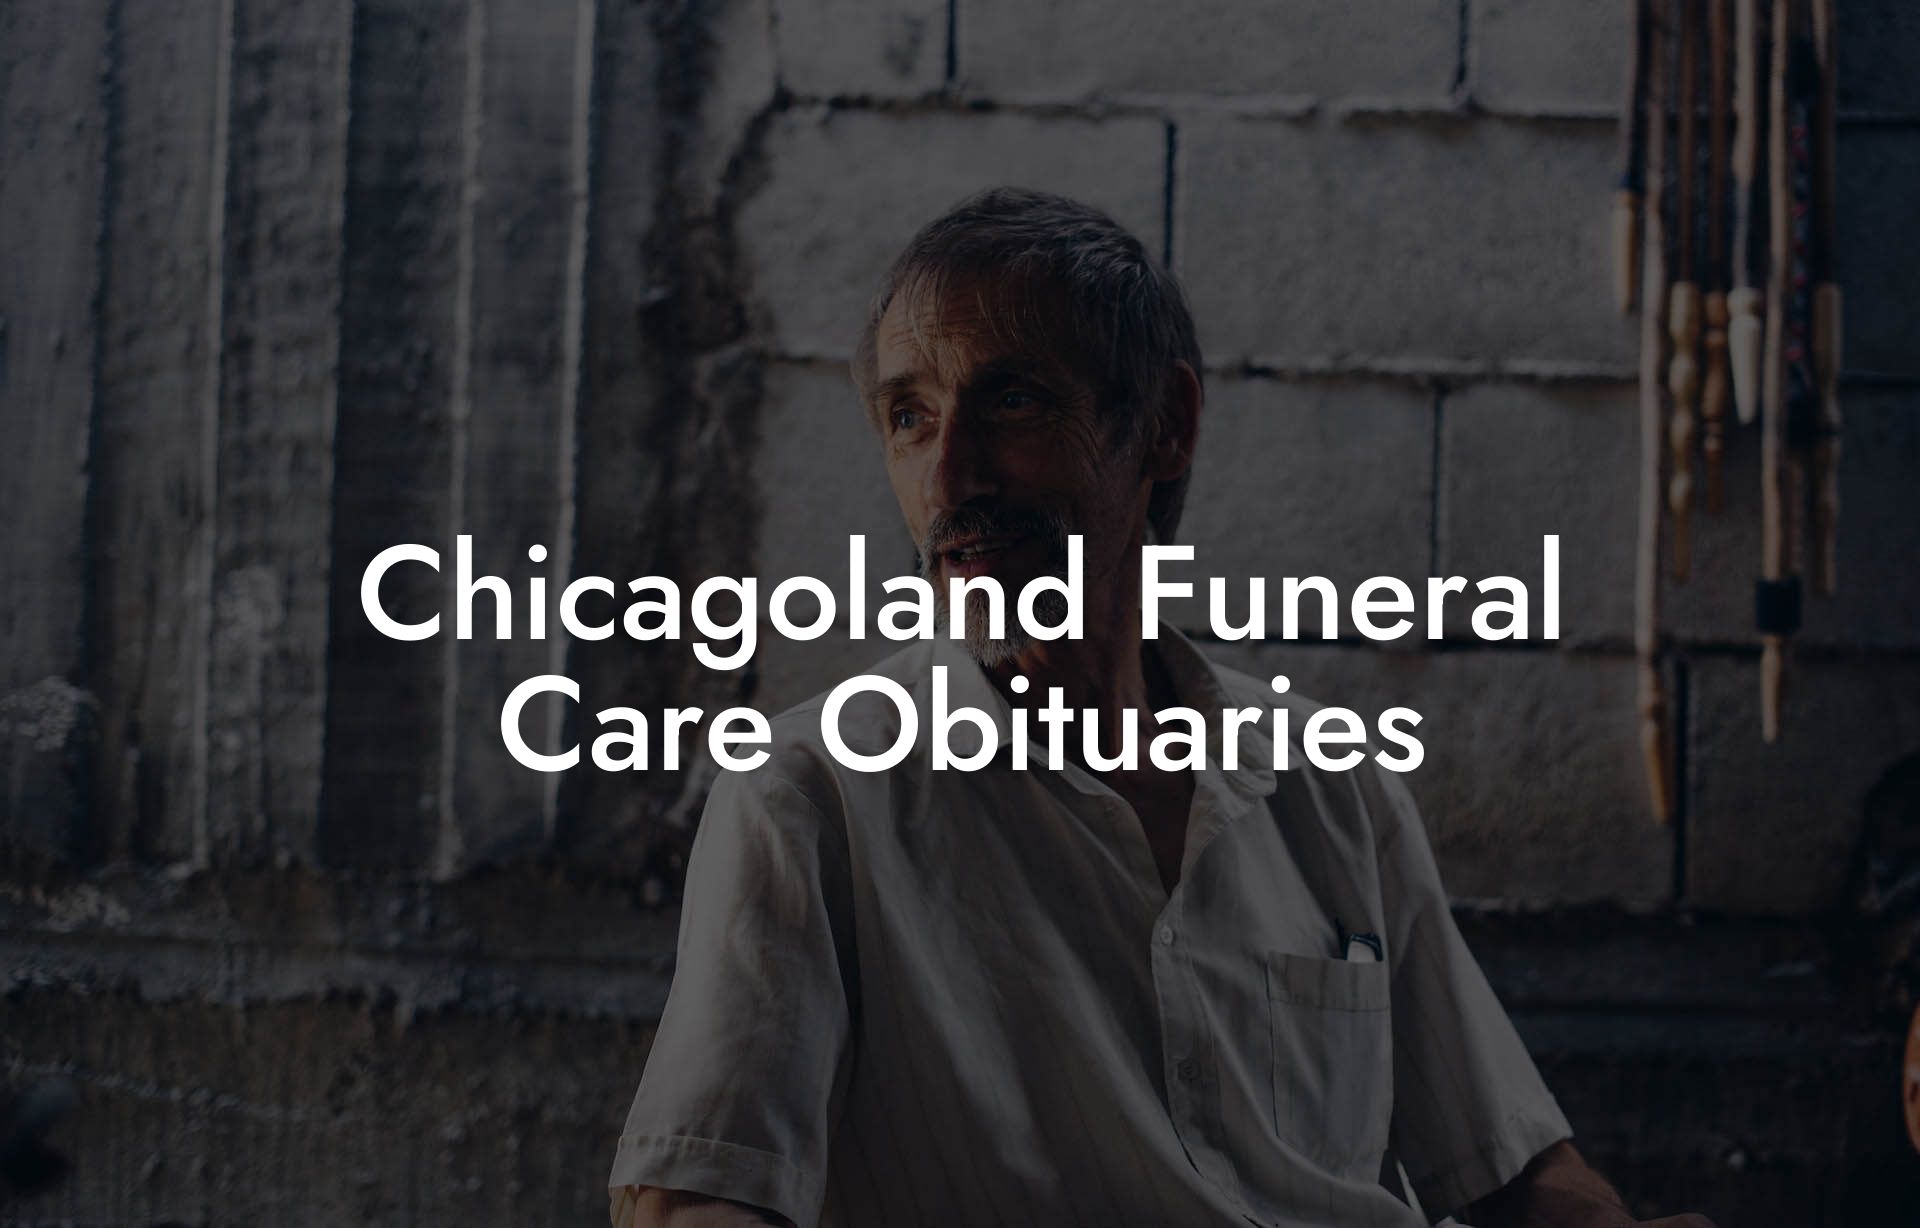 Chicagoland Funeral Care Obituaries